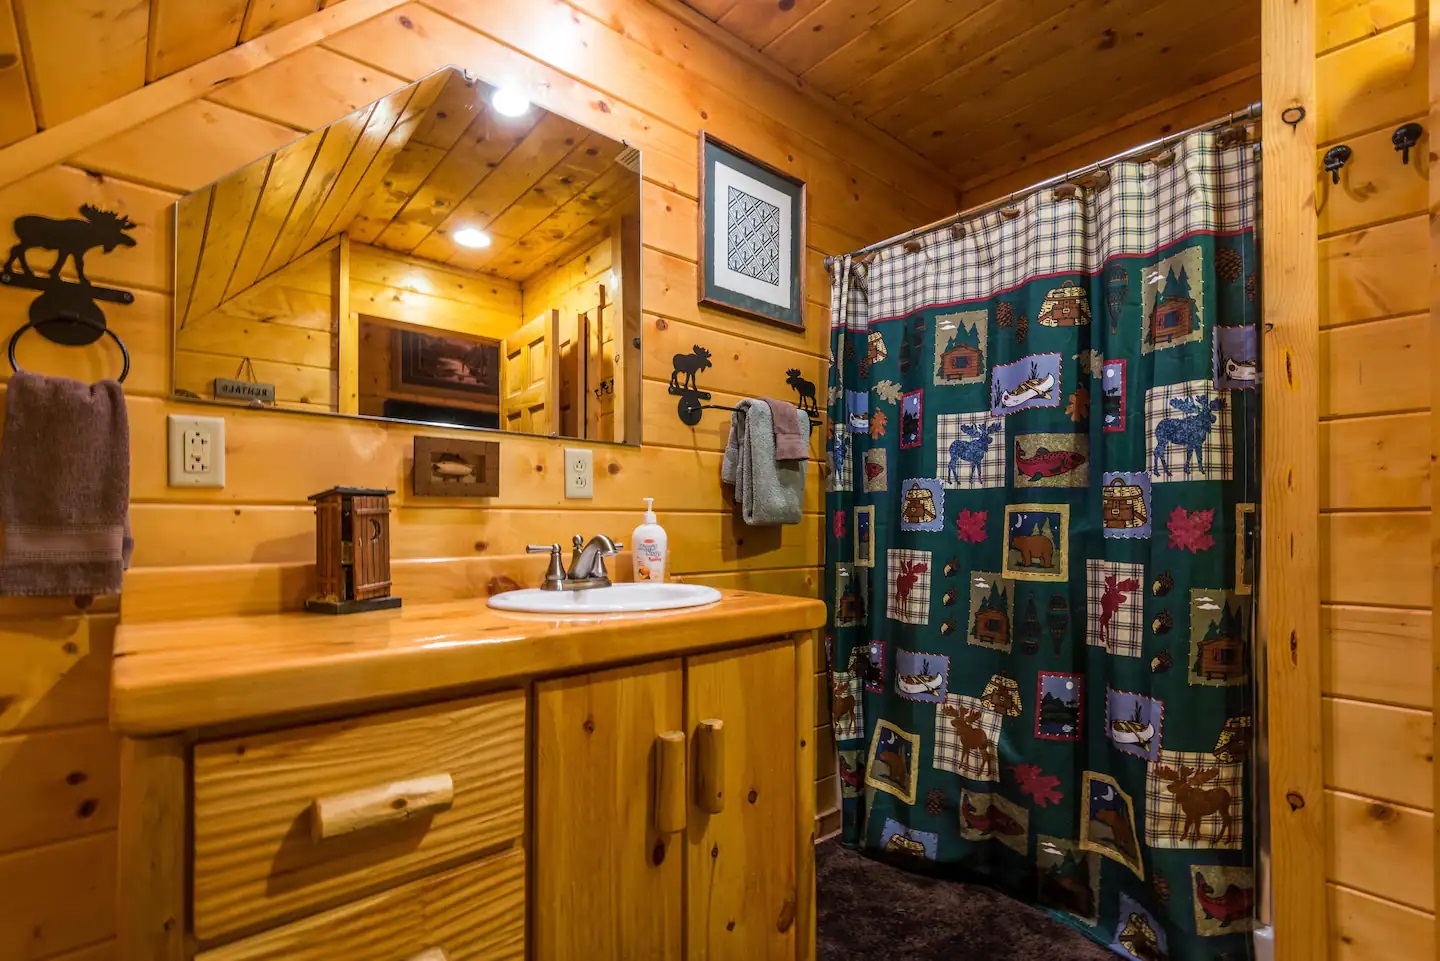 Fairytale Log Cabin bathroom in the bedroom with interesting curtains